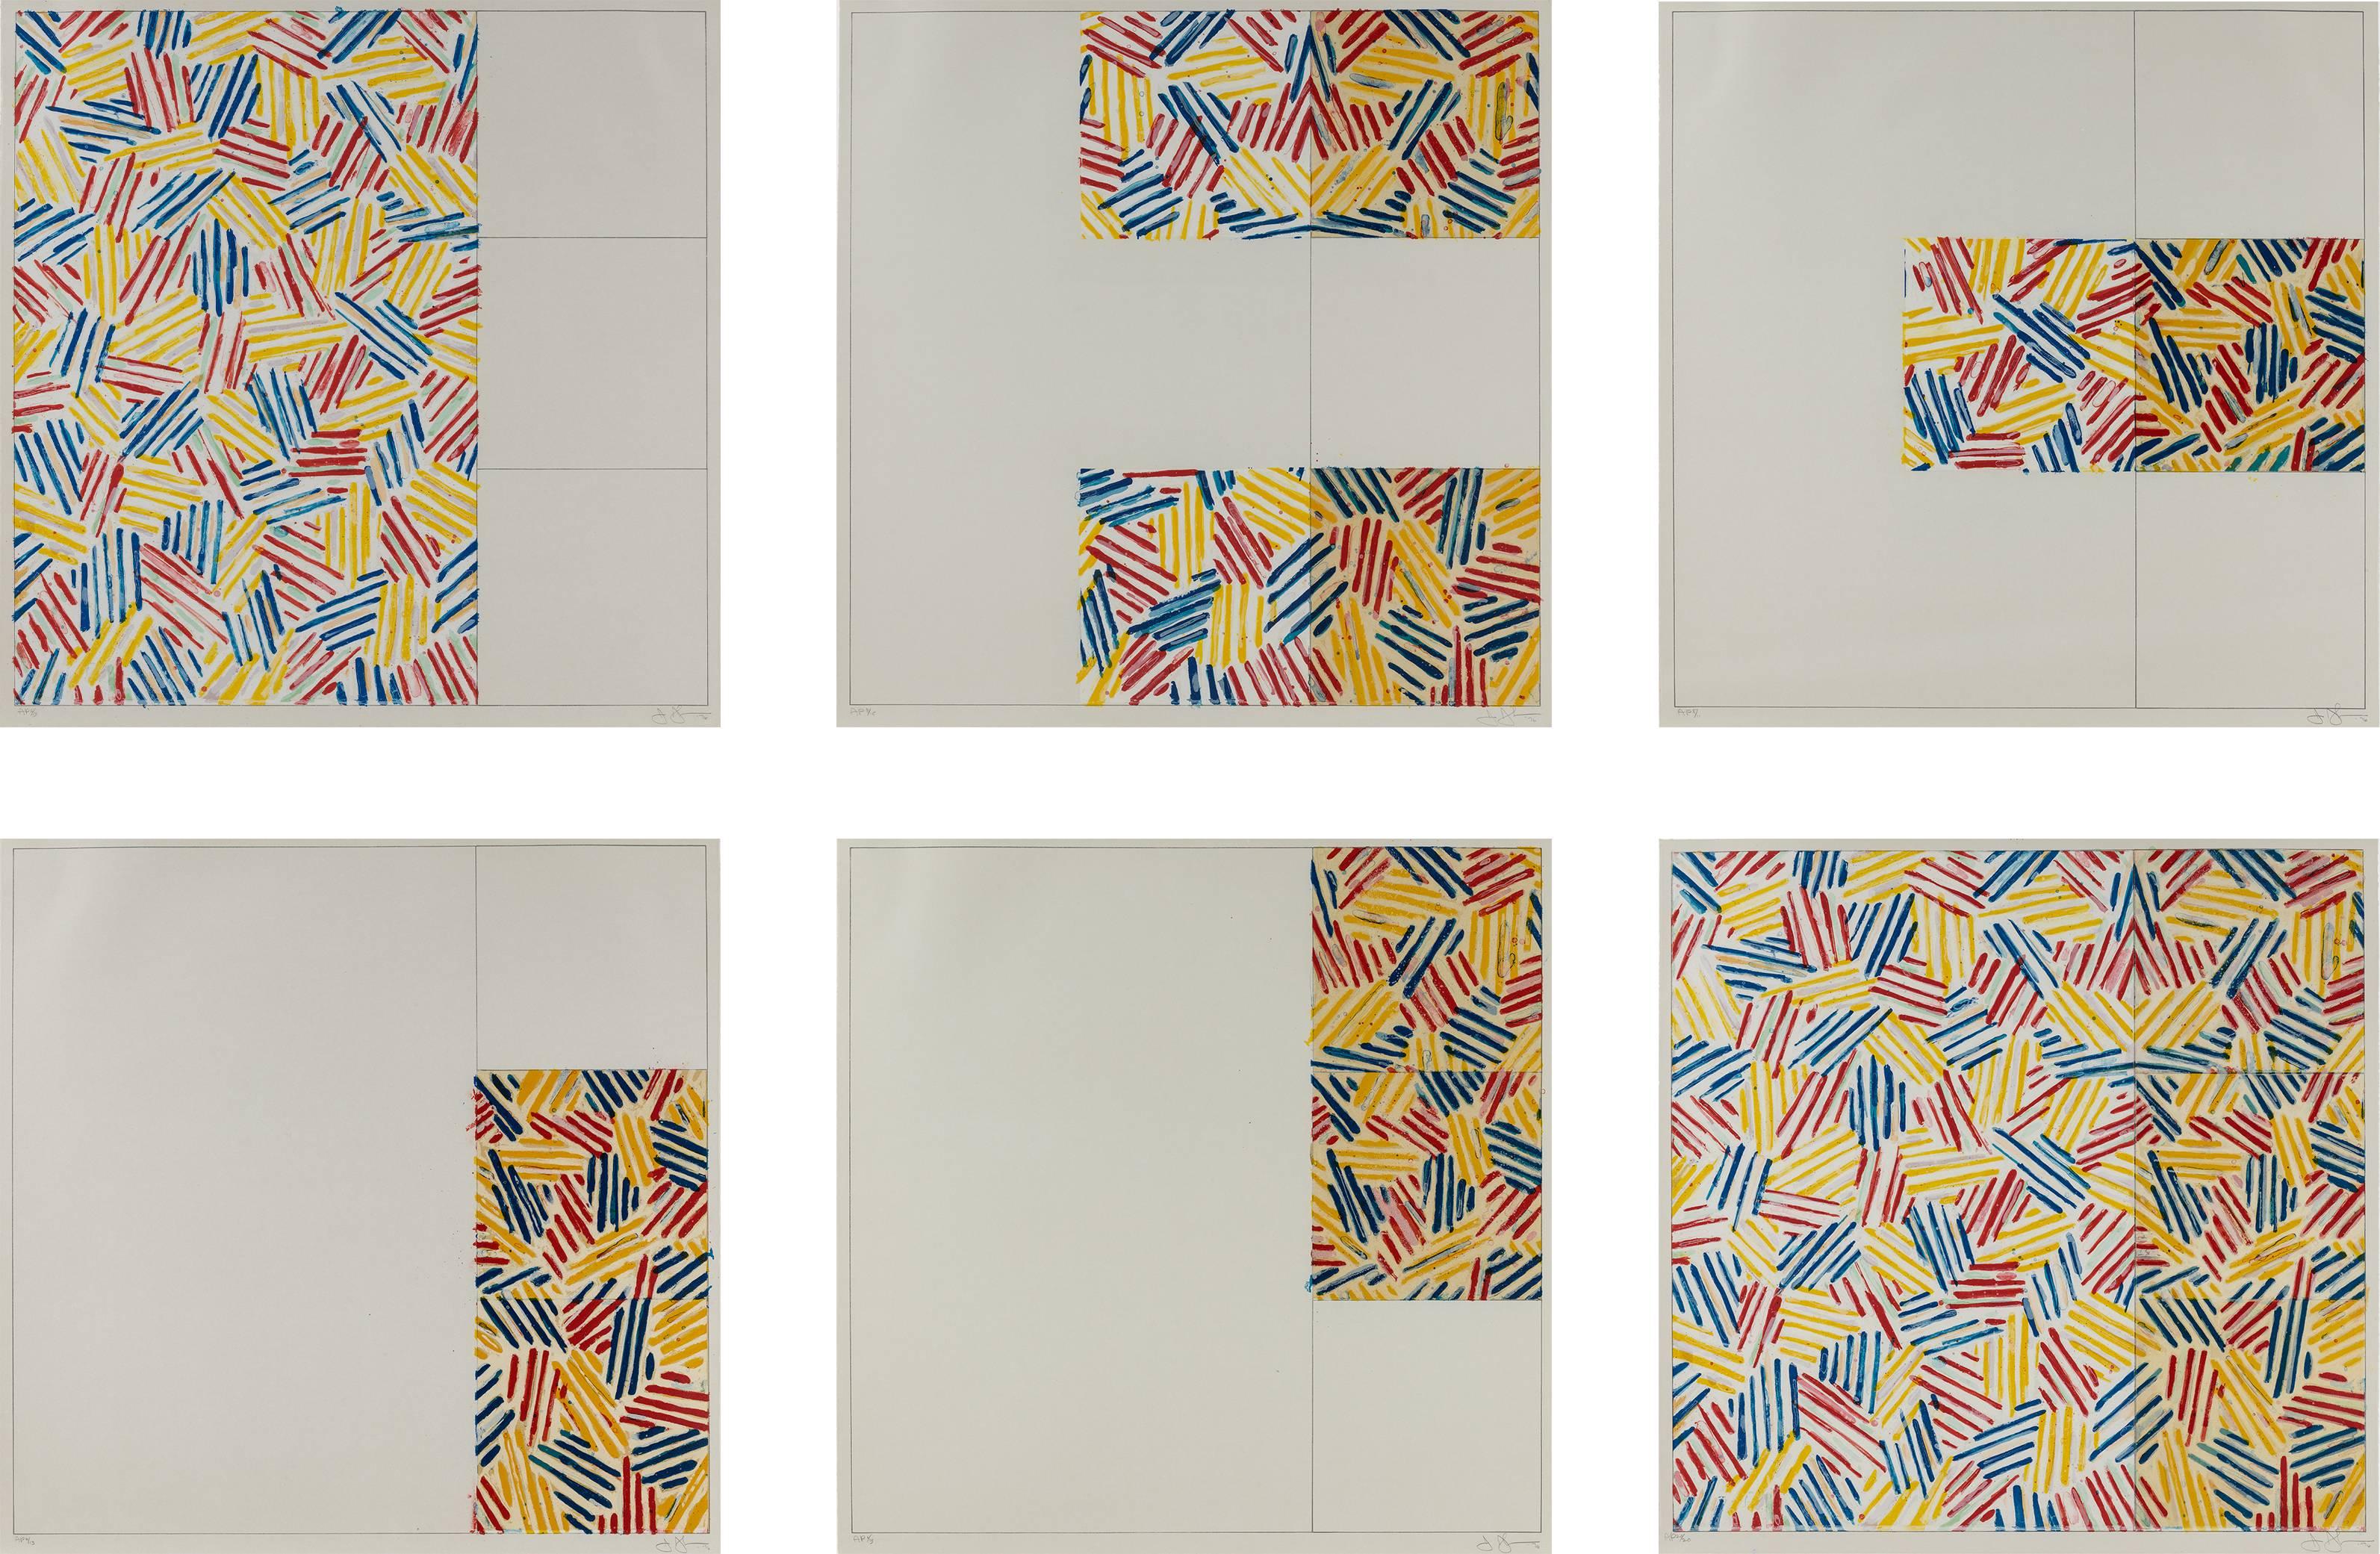 Jasper Johns Abstract Print - 6 Lithographs (after Untitled 1975)